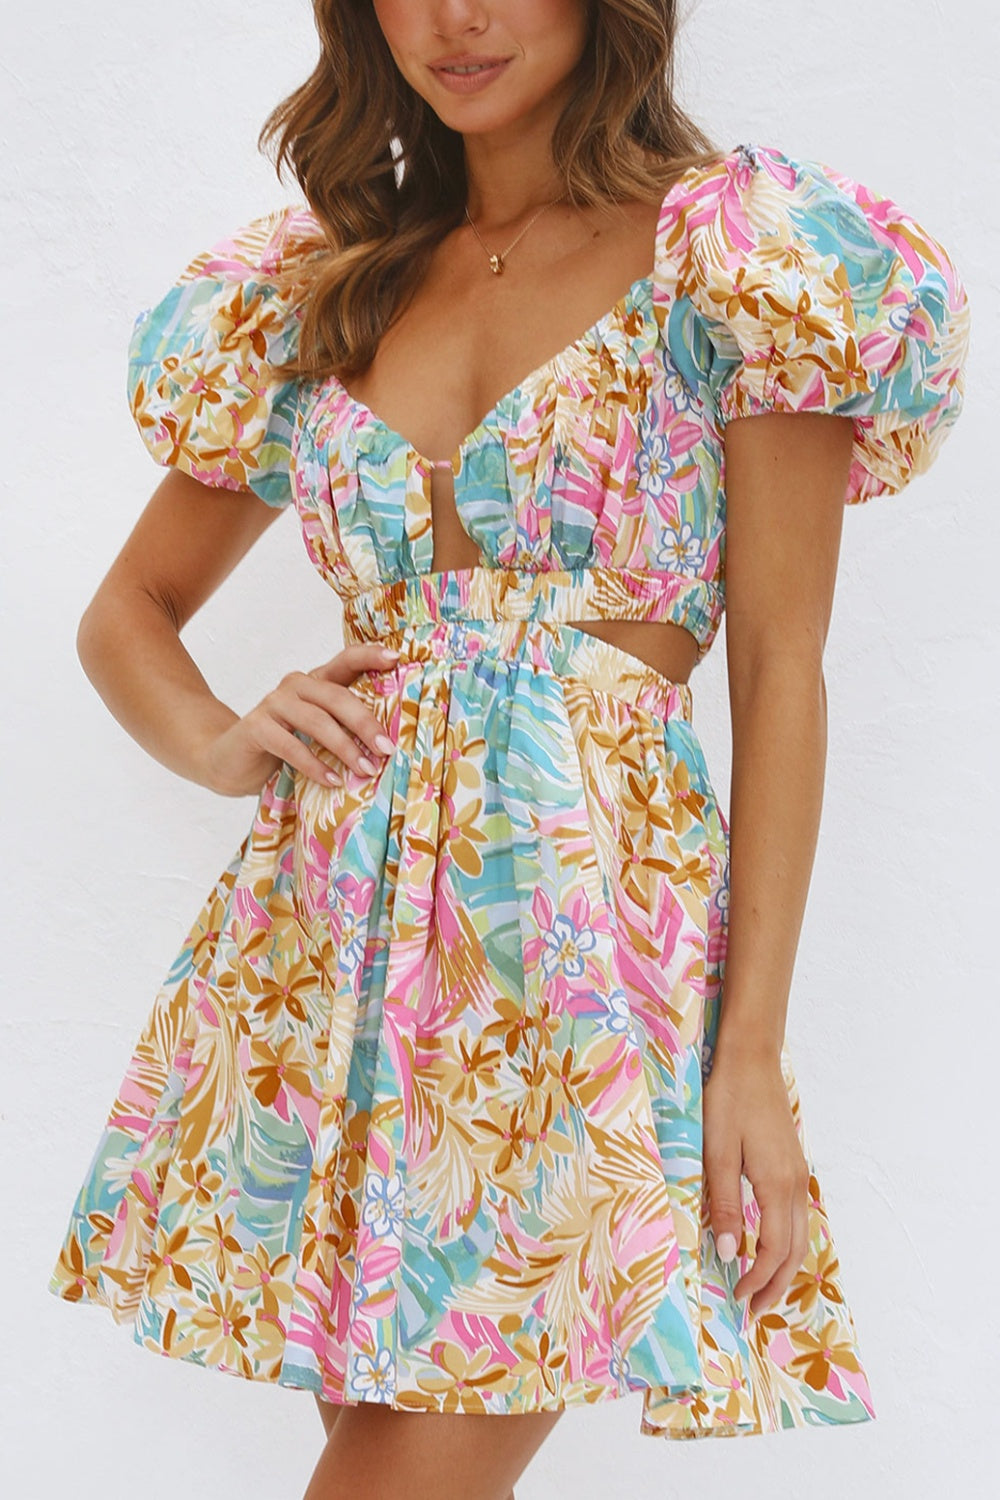 Floral Short Sleeve Backless Mini Dress for Beach Wedding Guests